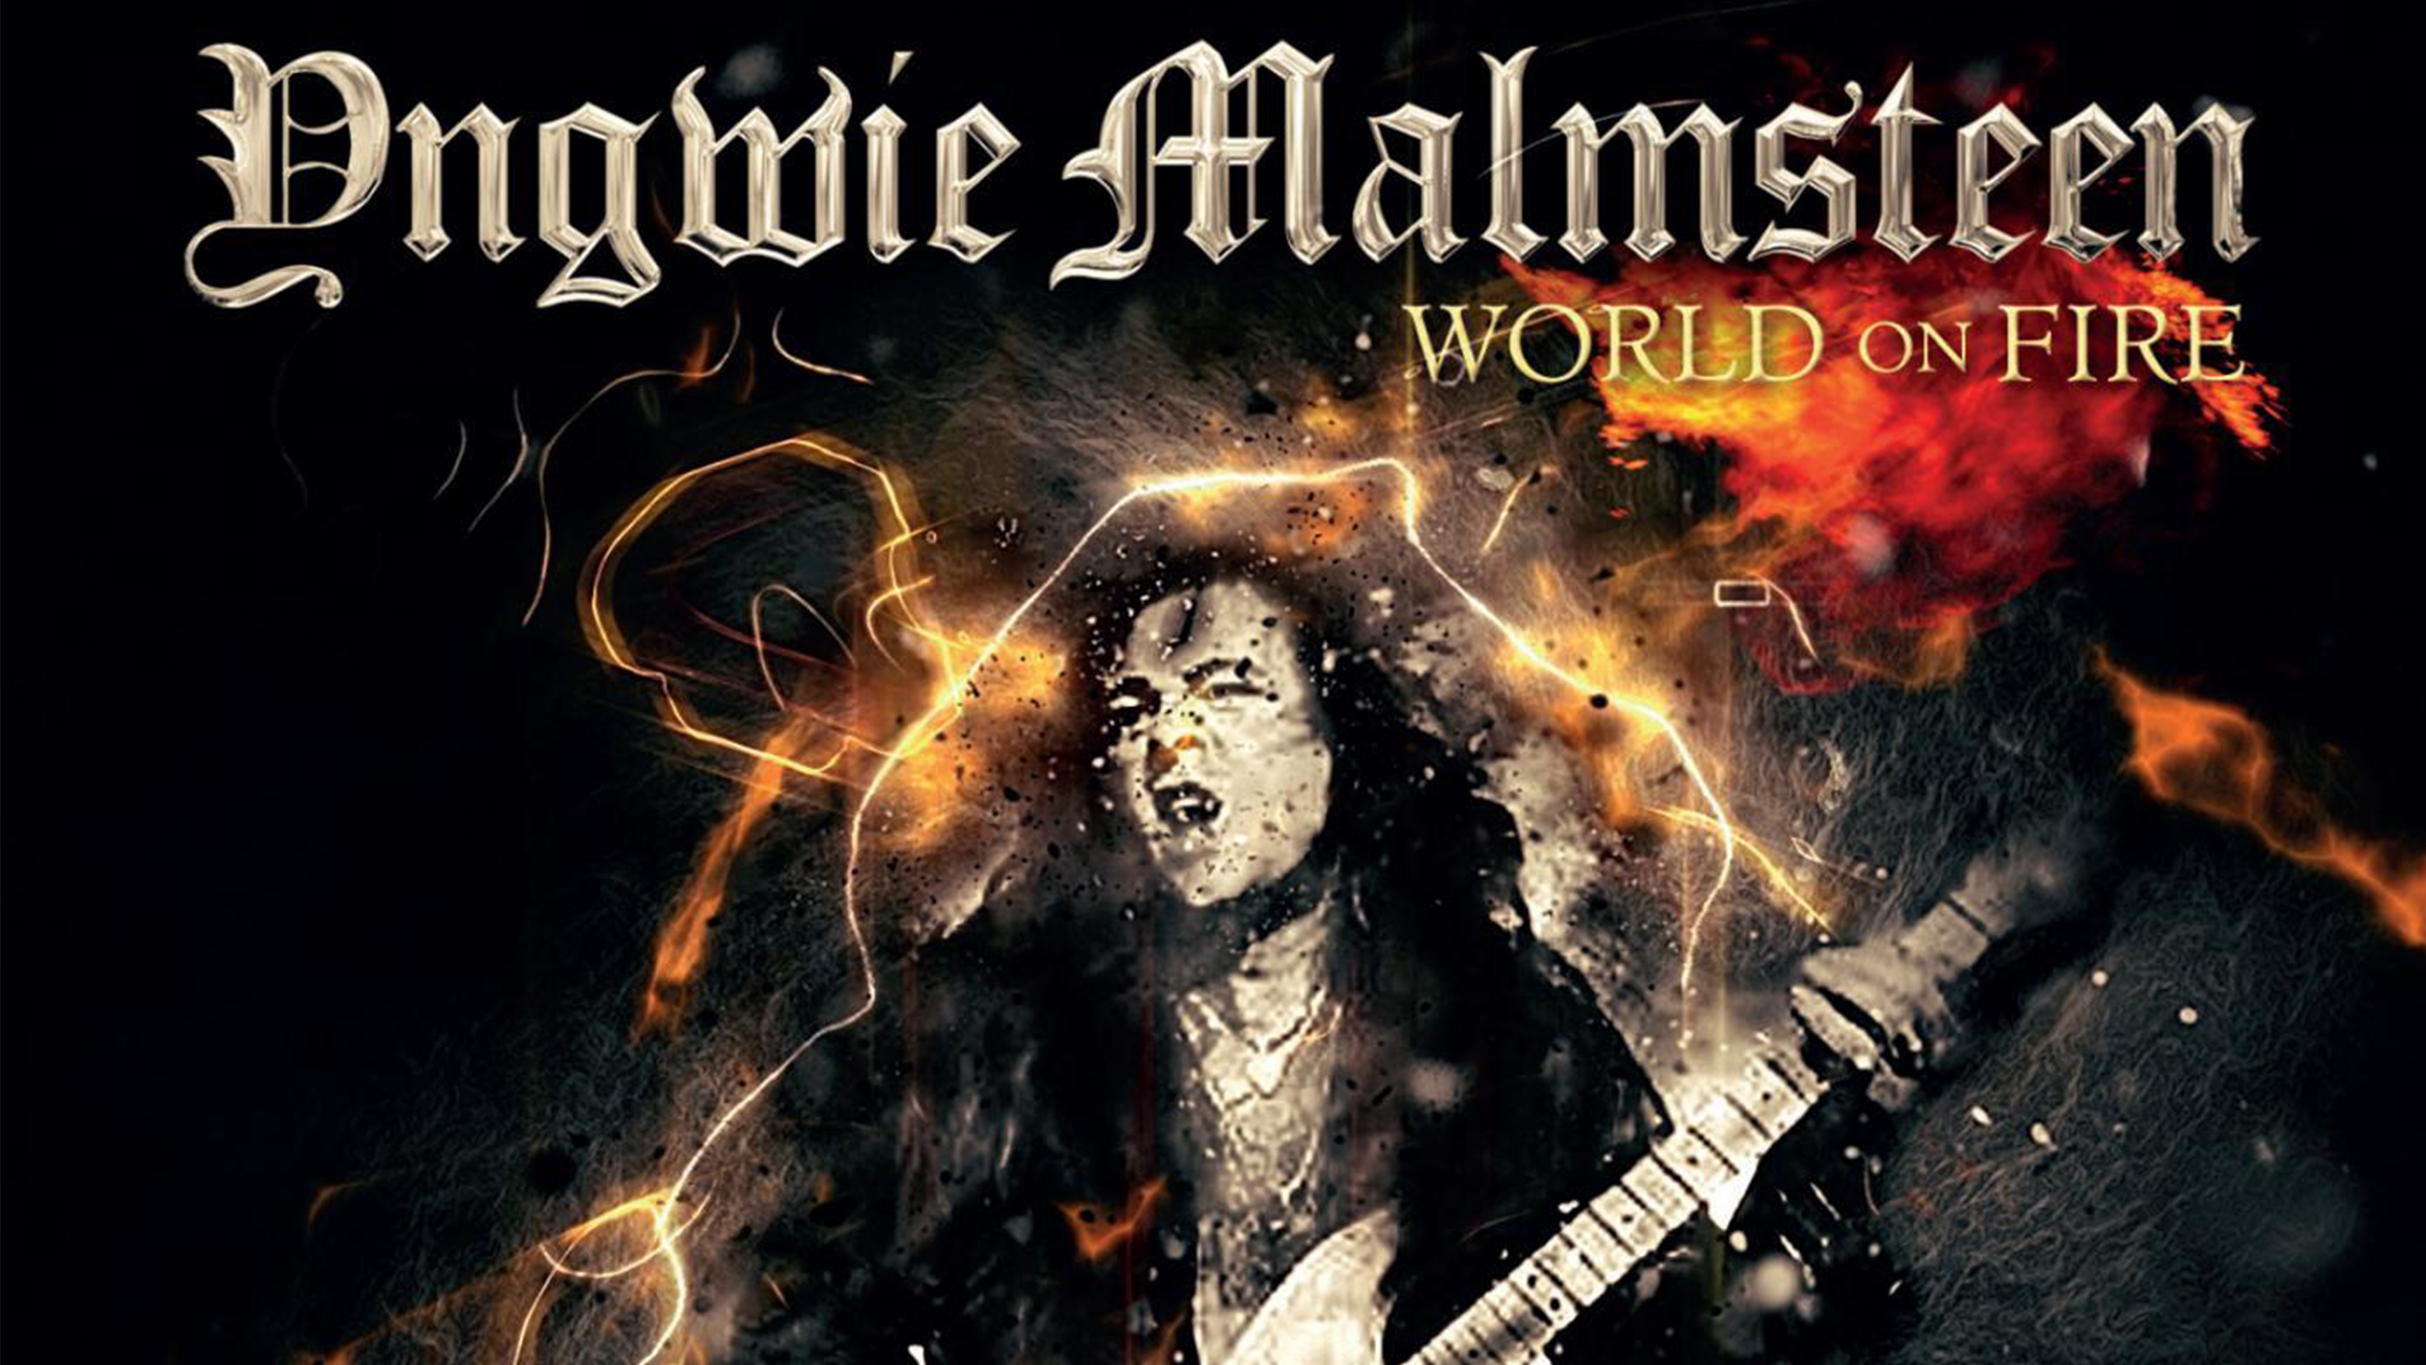 WIN TIX TO SEE GUITAR VIRTUOSO YNGWIE MALMSTEEN AT HOUSE OF BLUES LAS VEGAS!